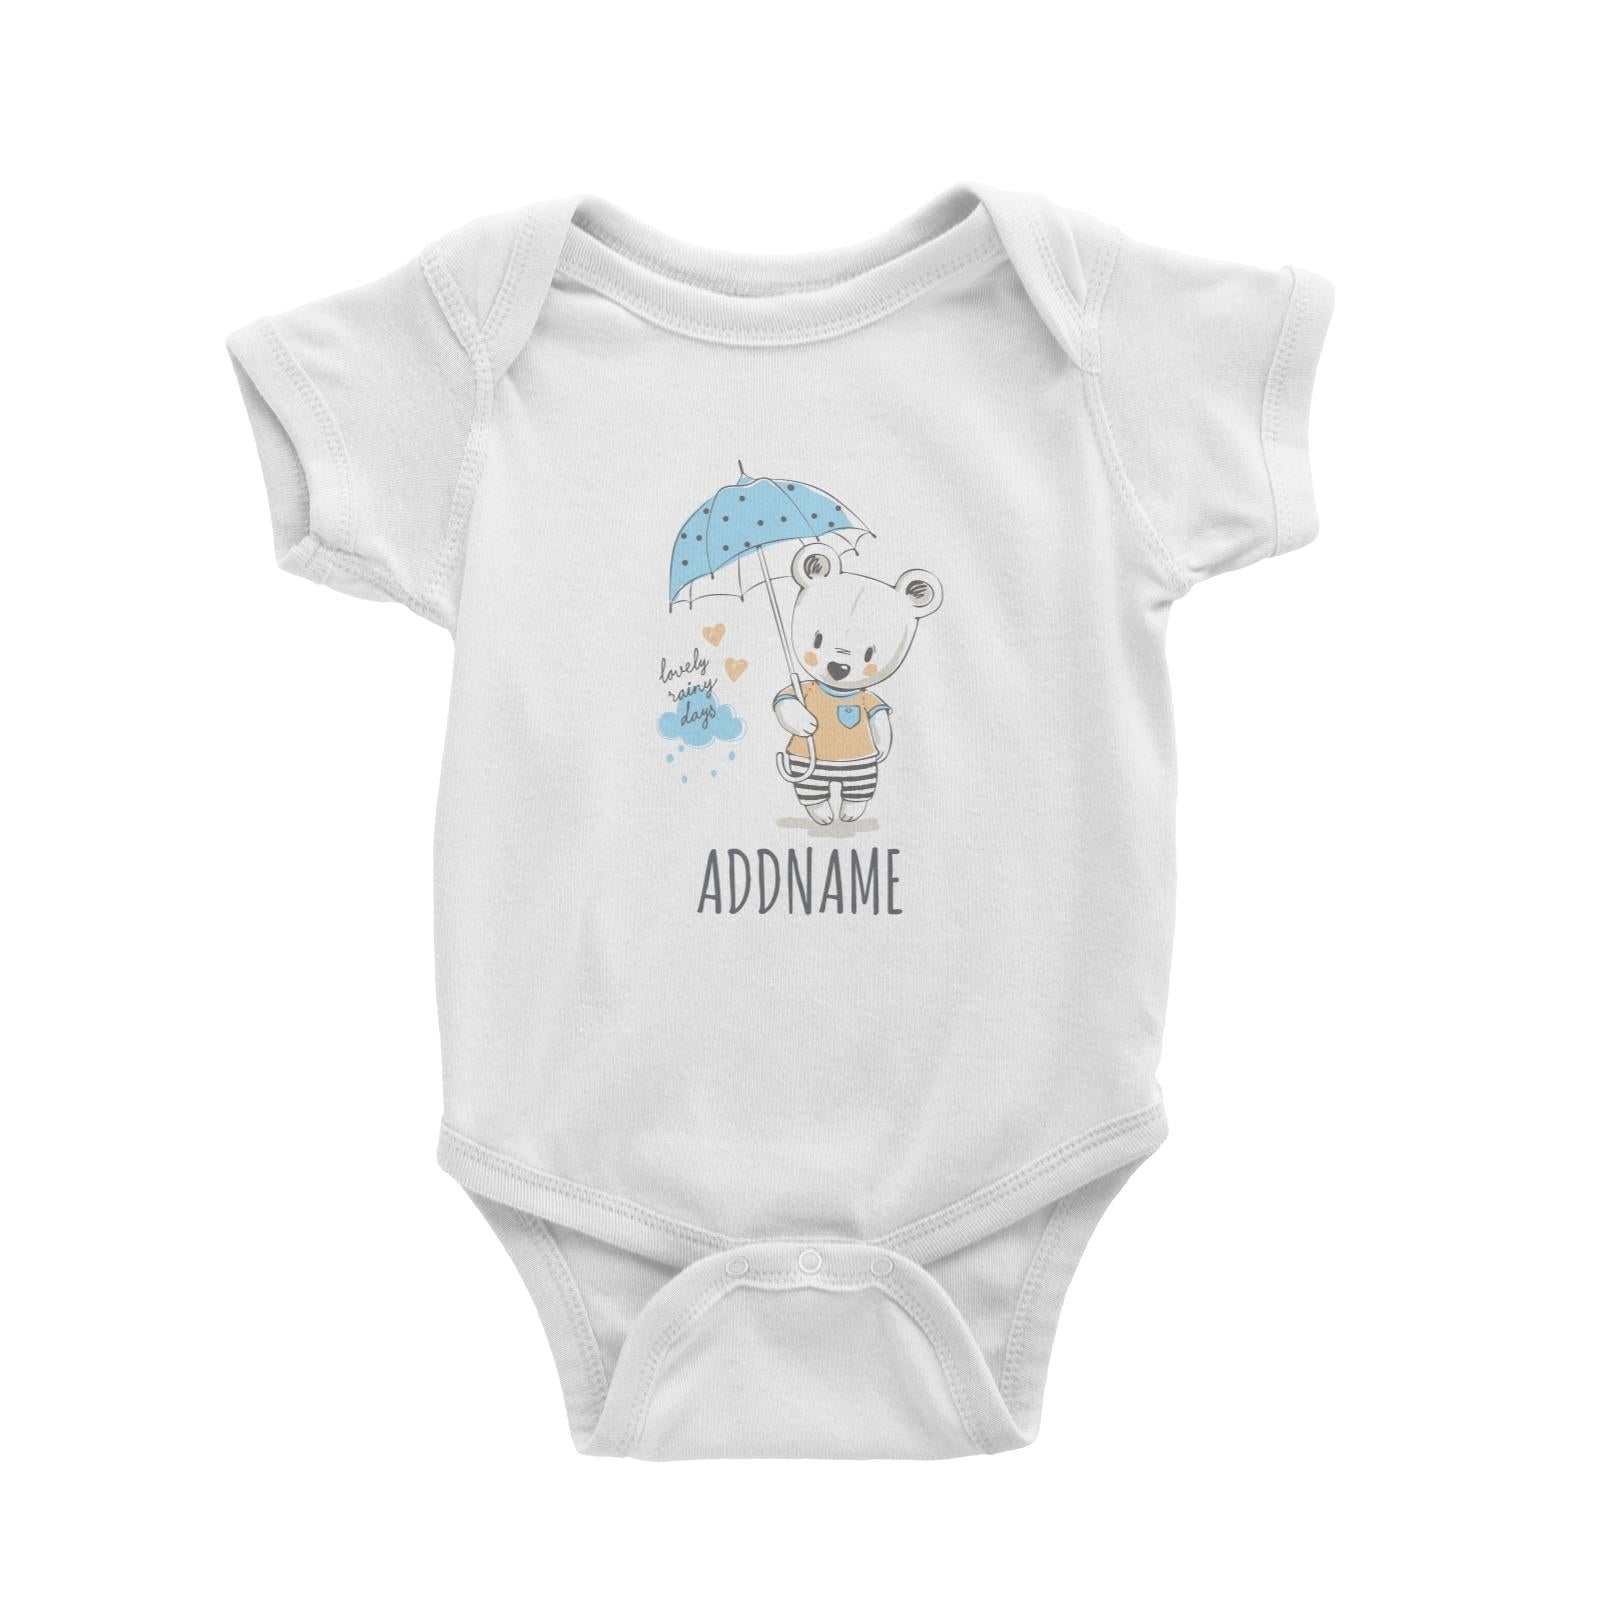 Bear with Umbrella White Baby Romper Personalizable Designs Cute Sweet Animal HG